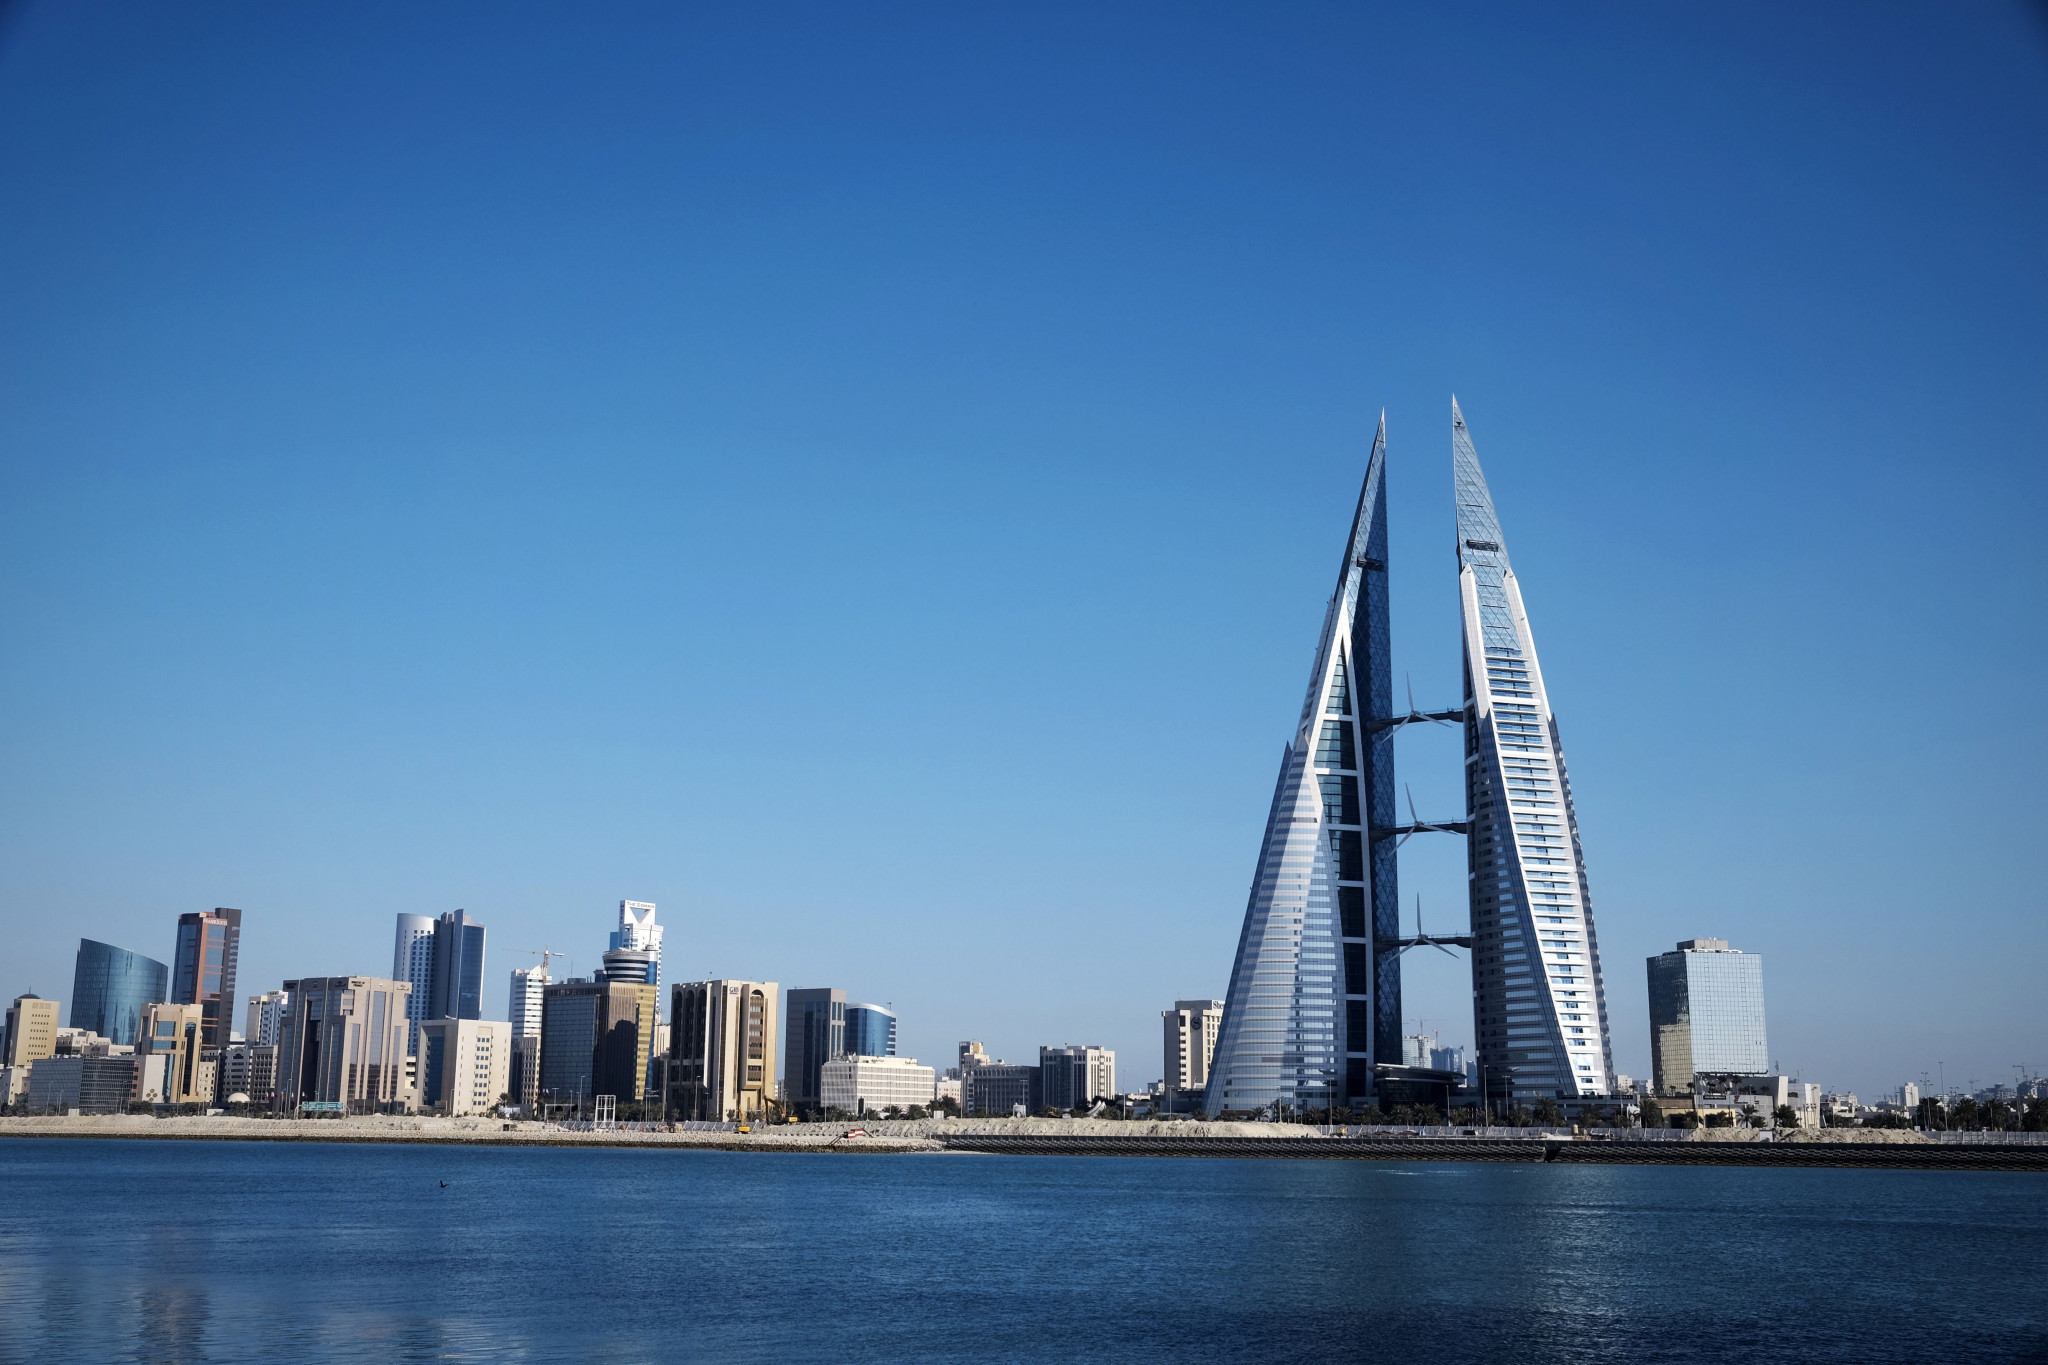 Manama is set to host this year's IPC General Assembly ©Getty Images